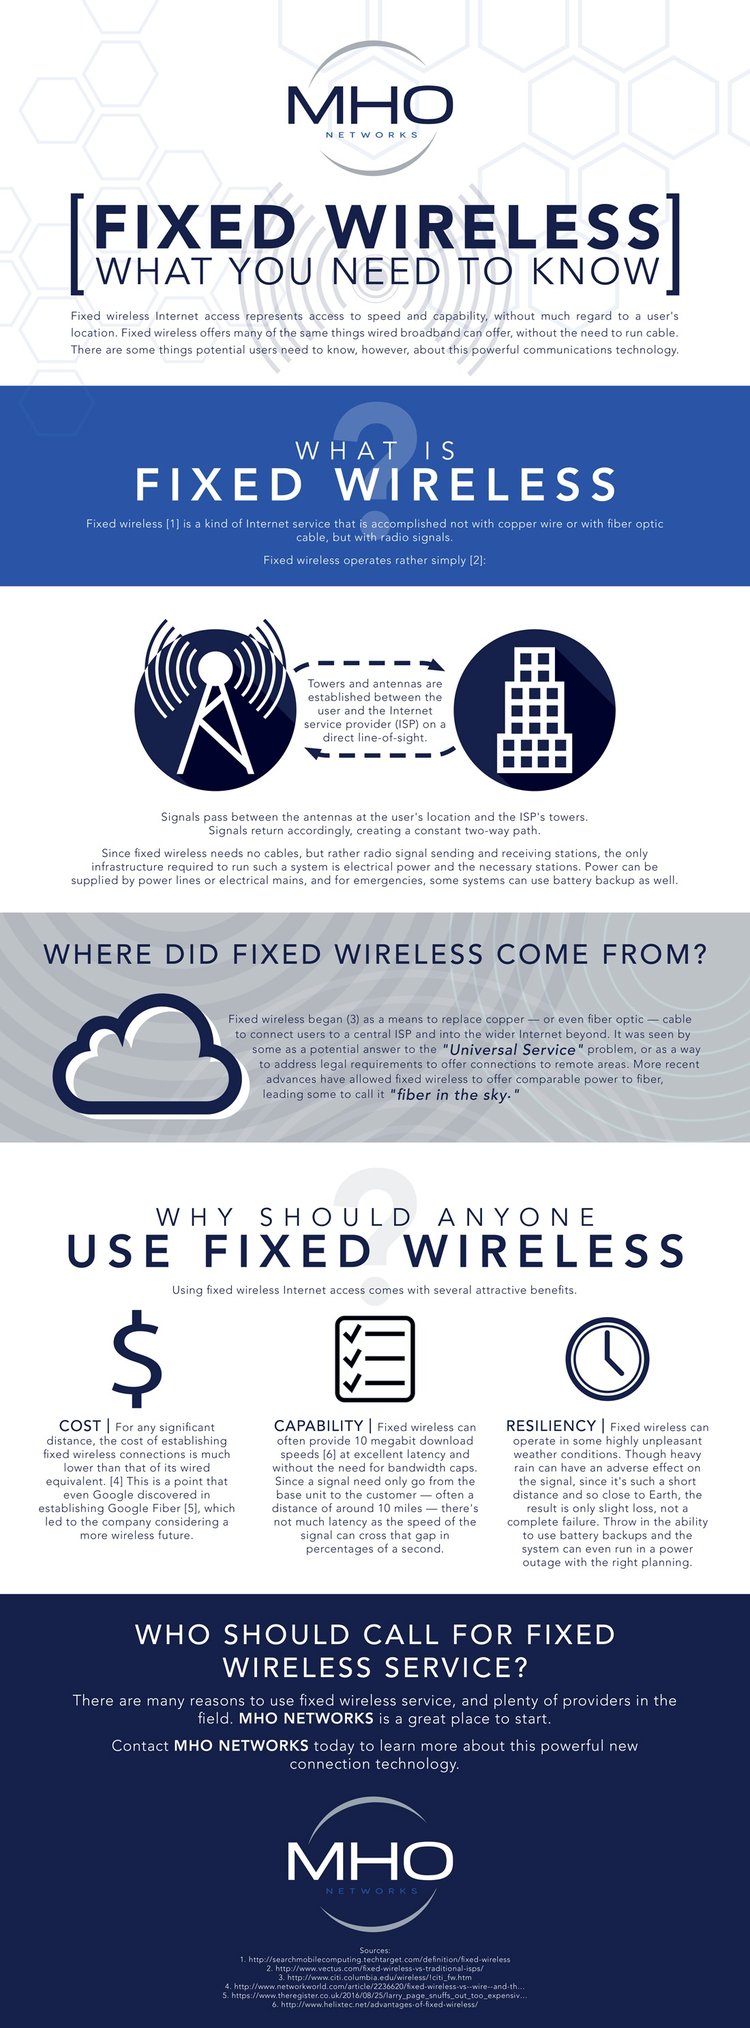 Fixed wireless may be the Internet connectivity solution your business needs.